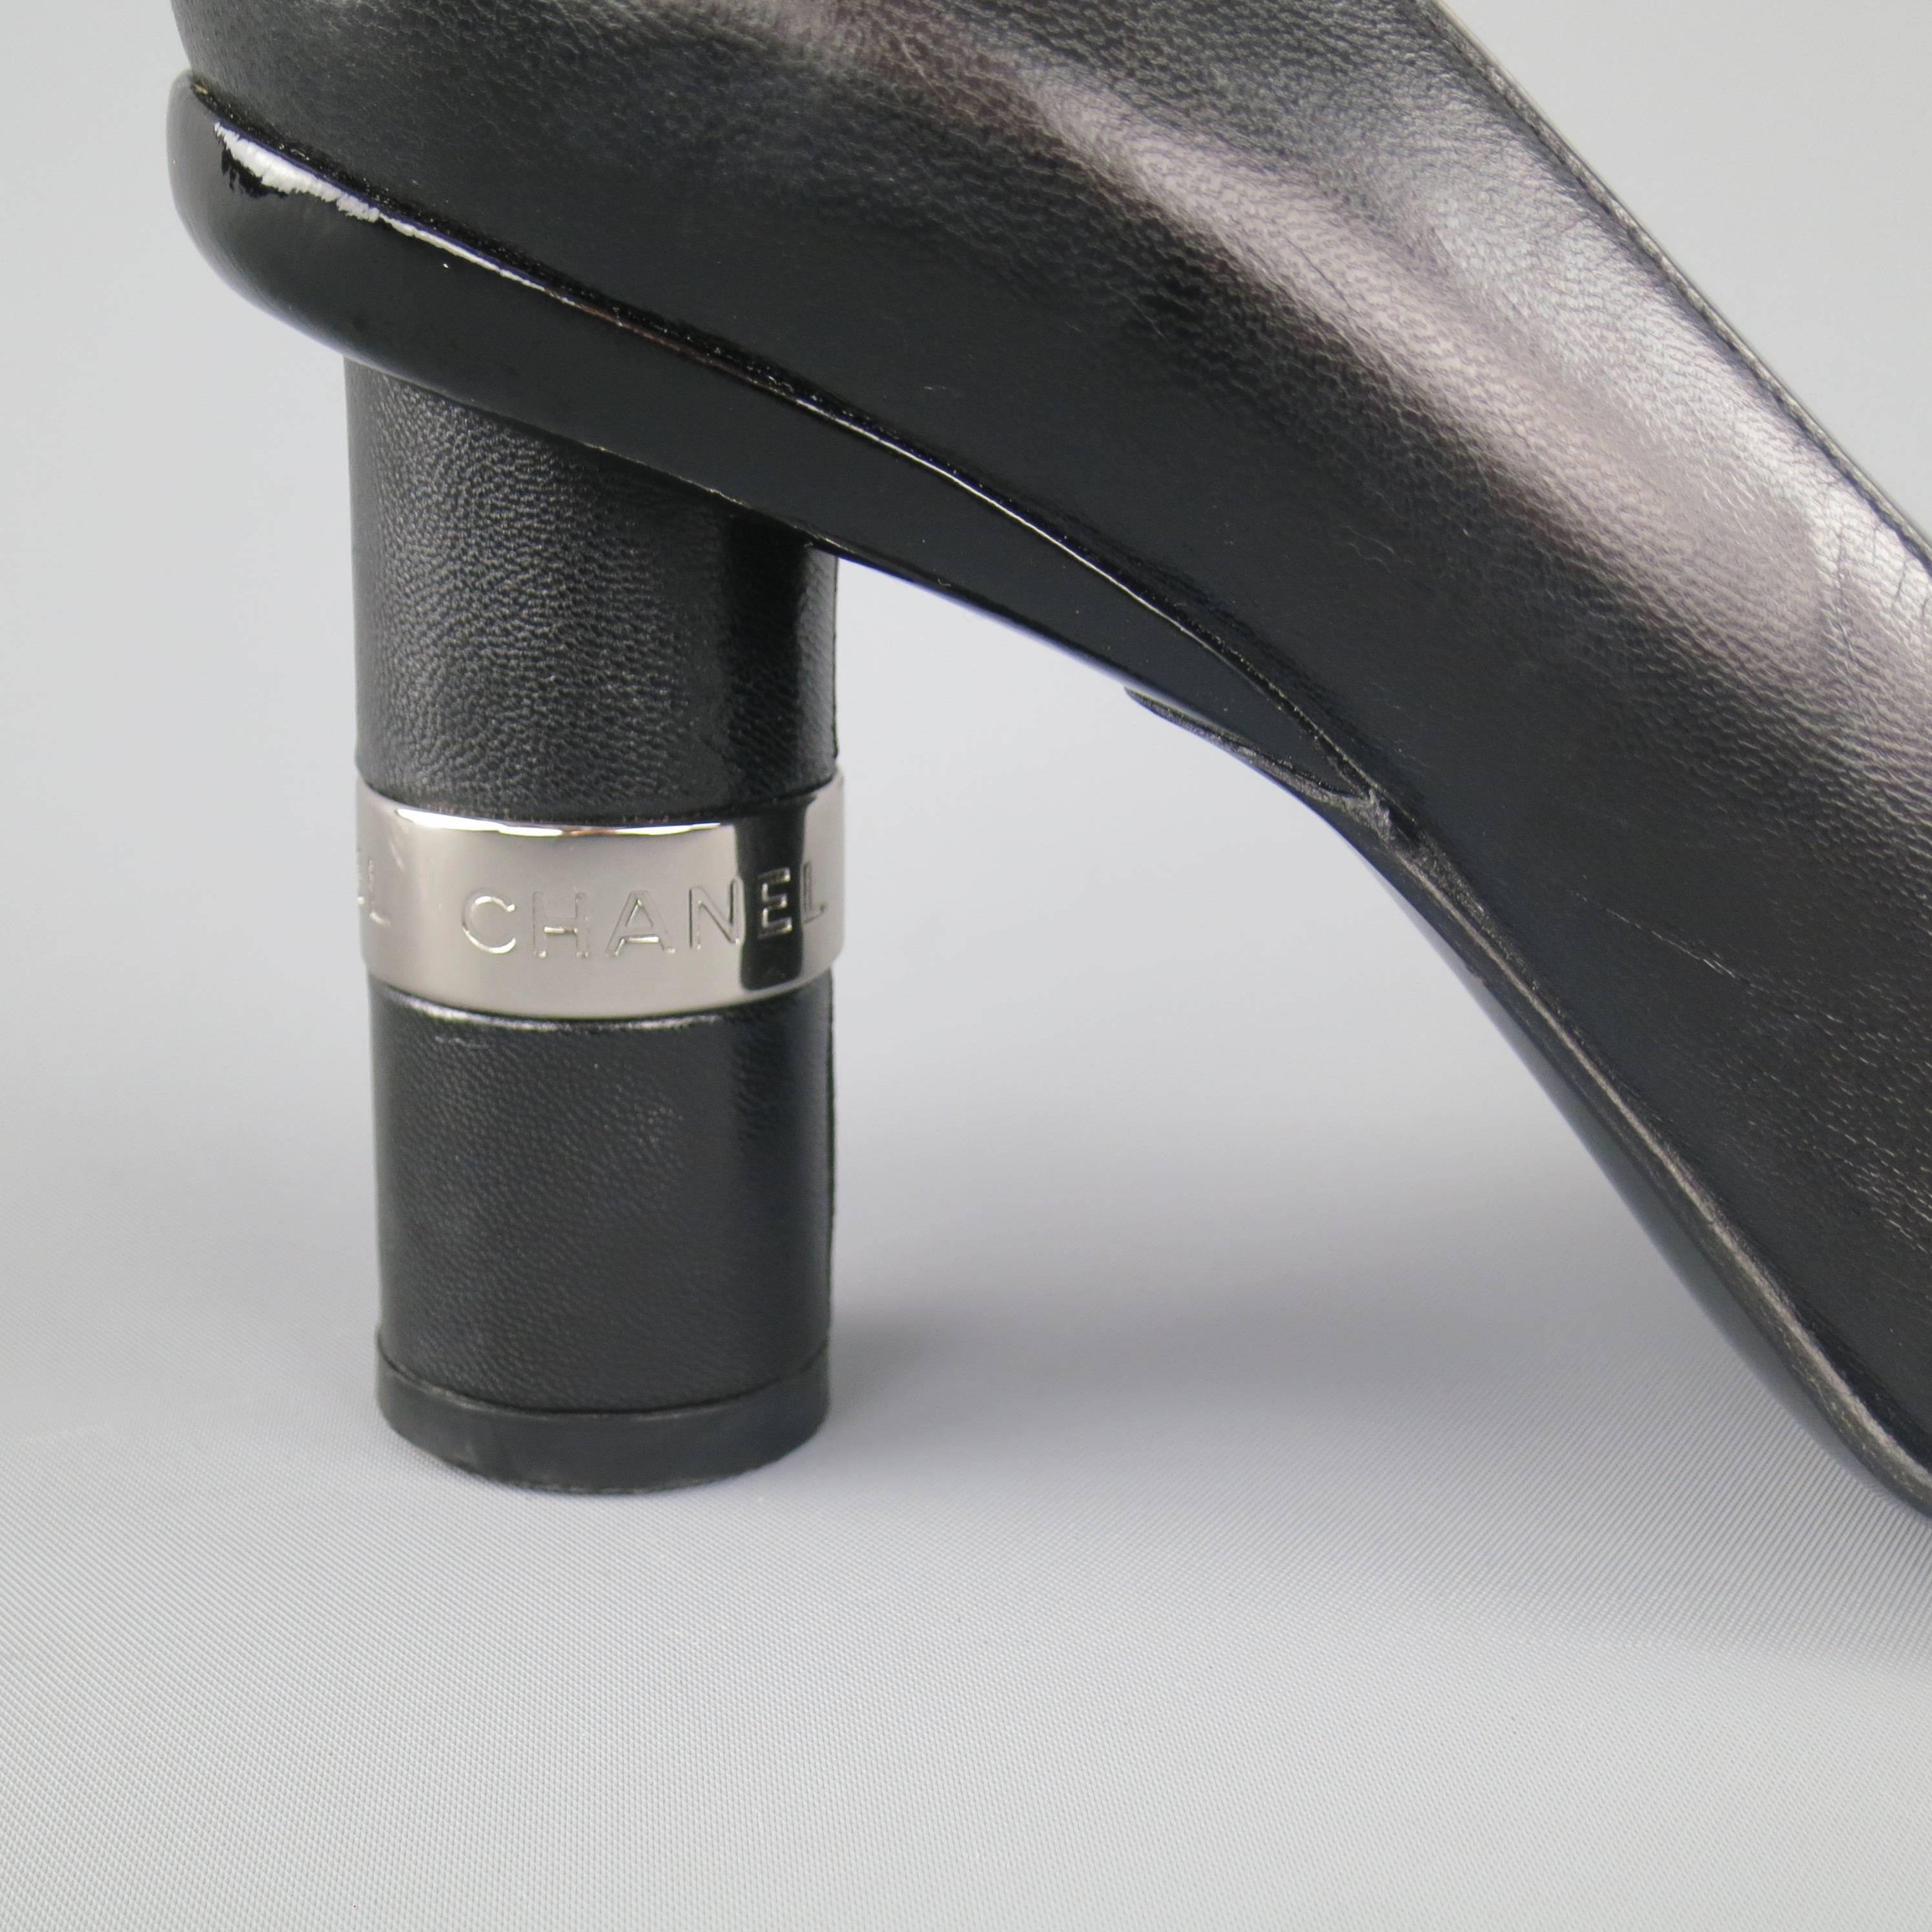 These fabulous vintage CHANEL pumps come in smooth black leather and feature a square toe with patent stripes, and a thick, cylindrical covered heel with silver tone logo engraved metal detail.  Made in Italy.
 
Excellent Pre-Owned